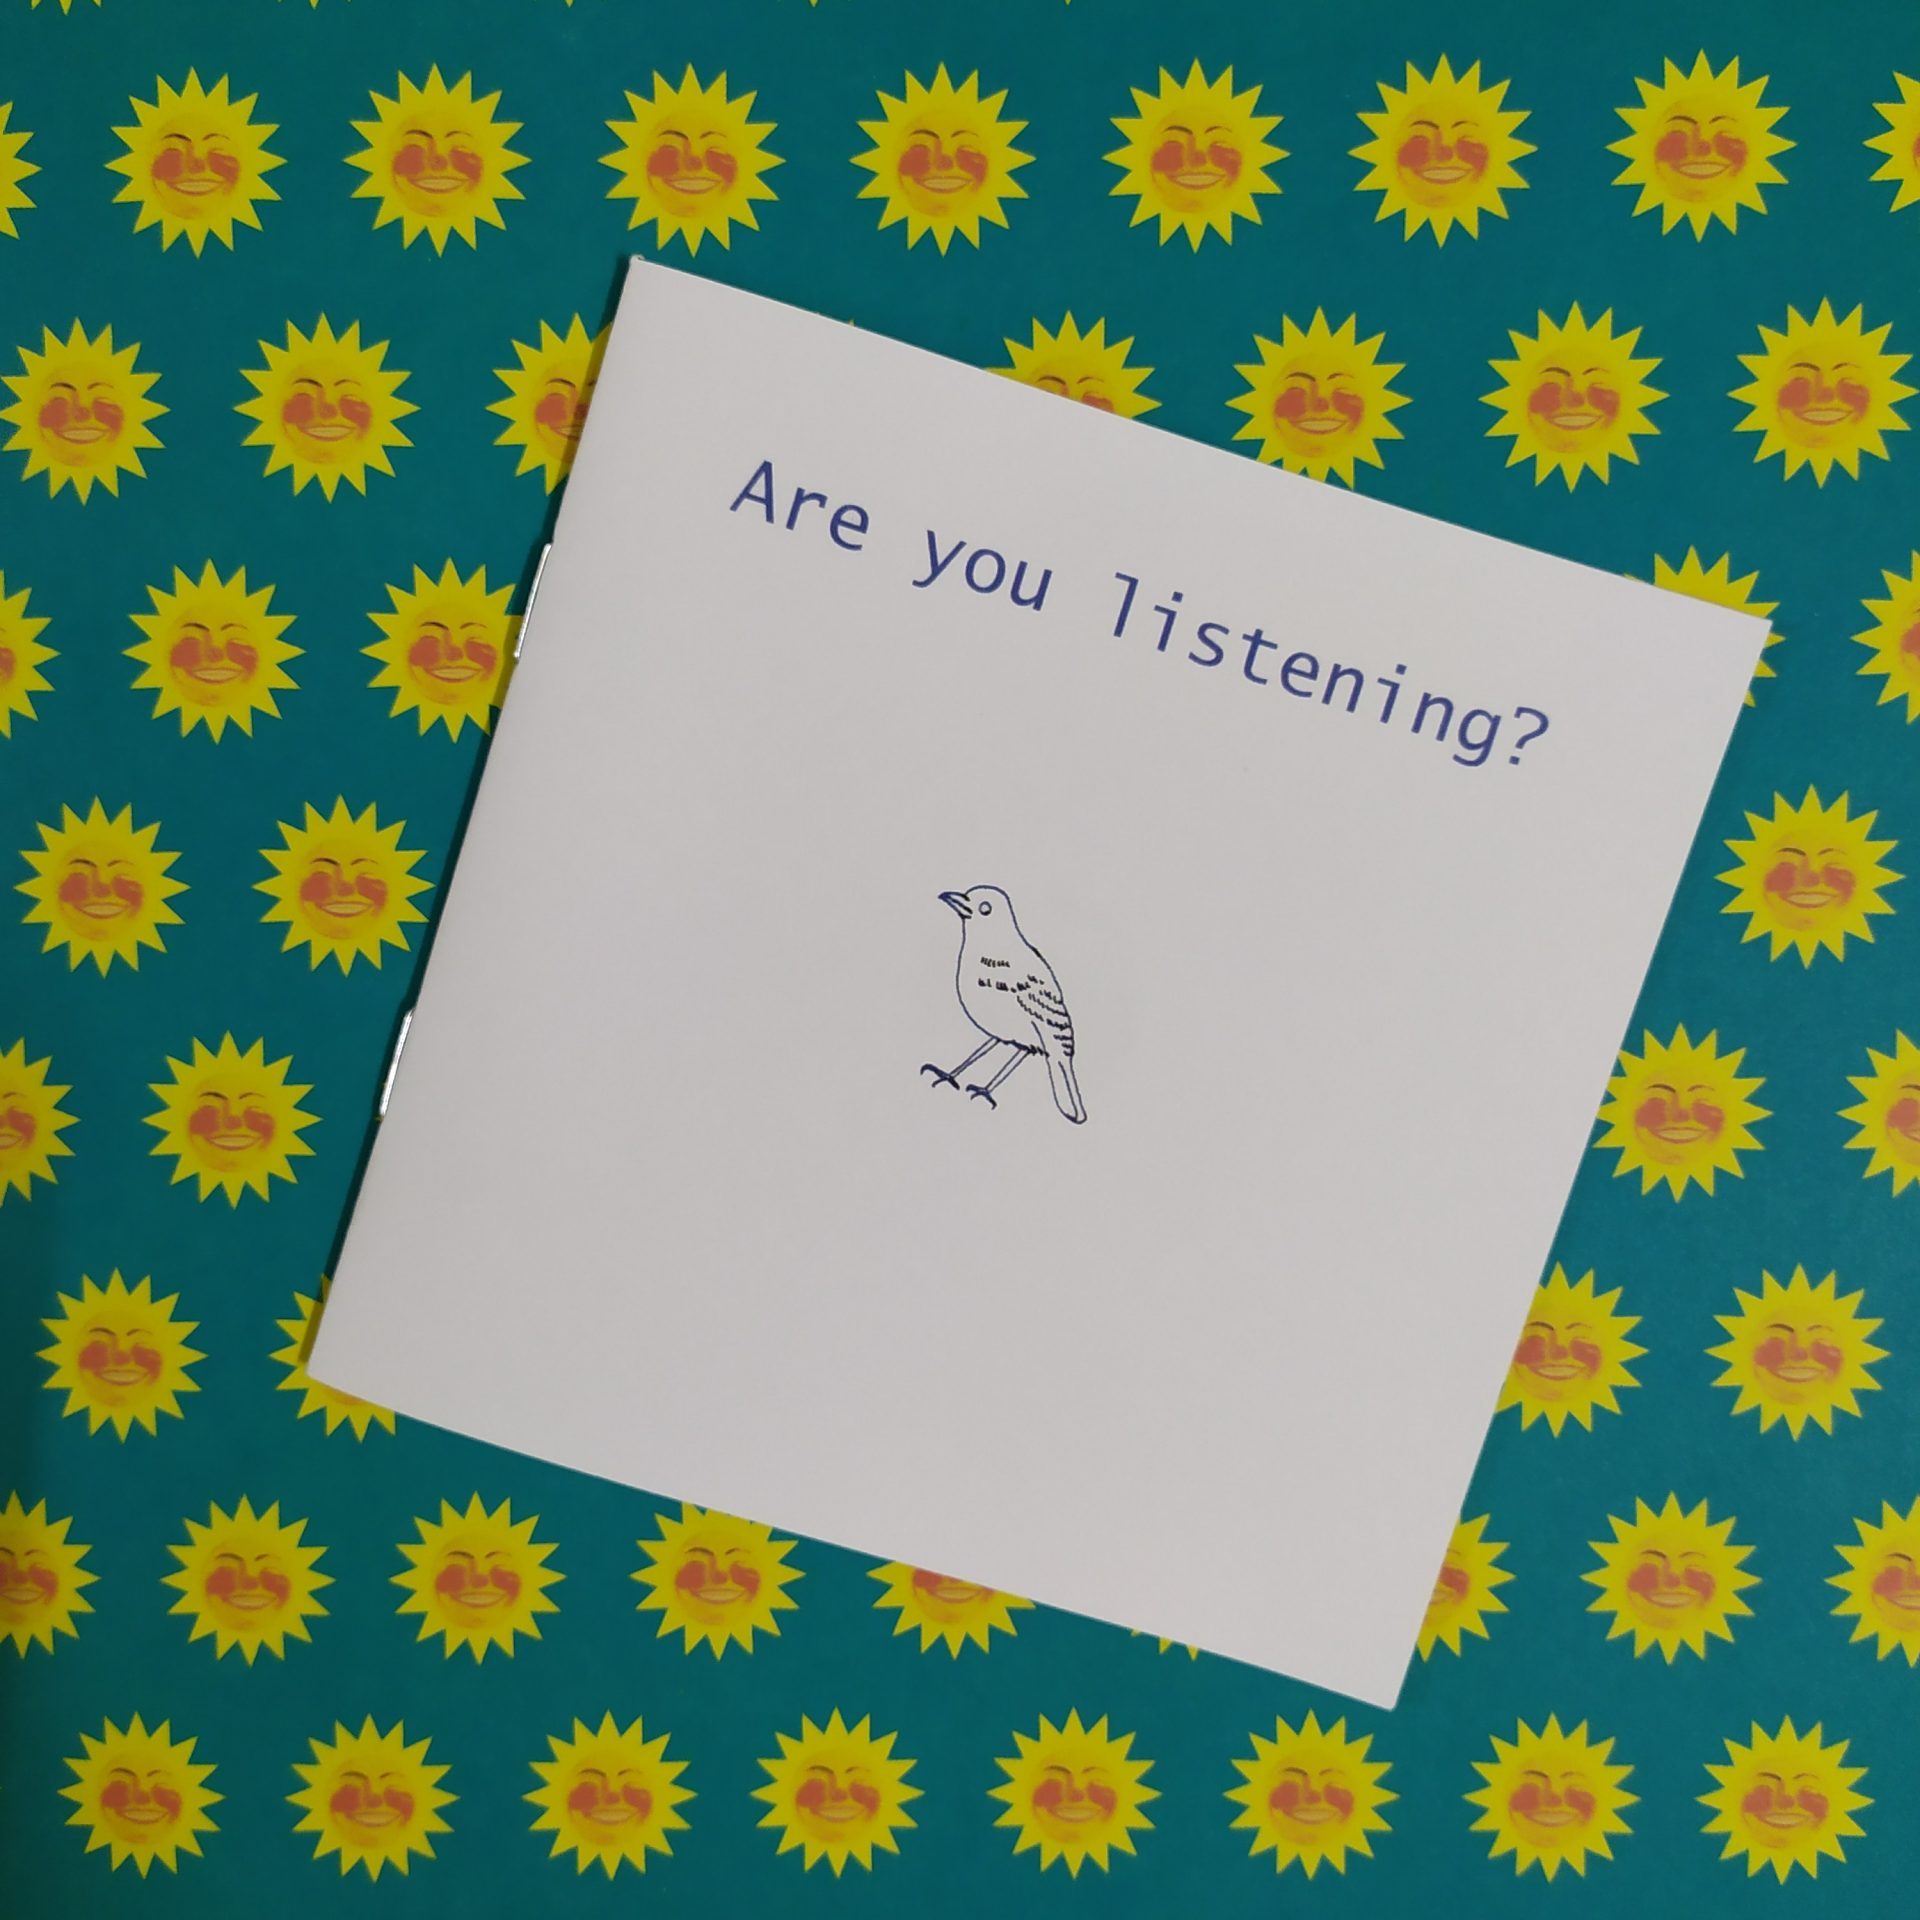 Zine: Are you listening?